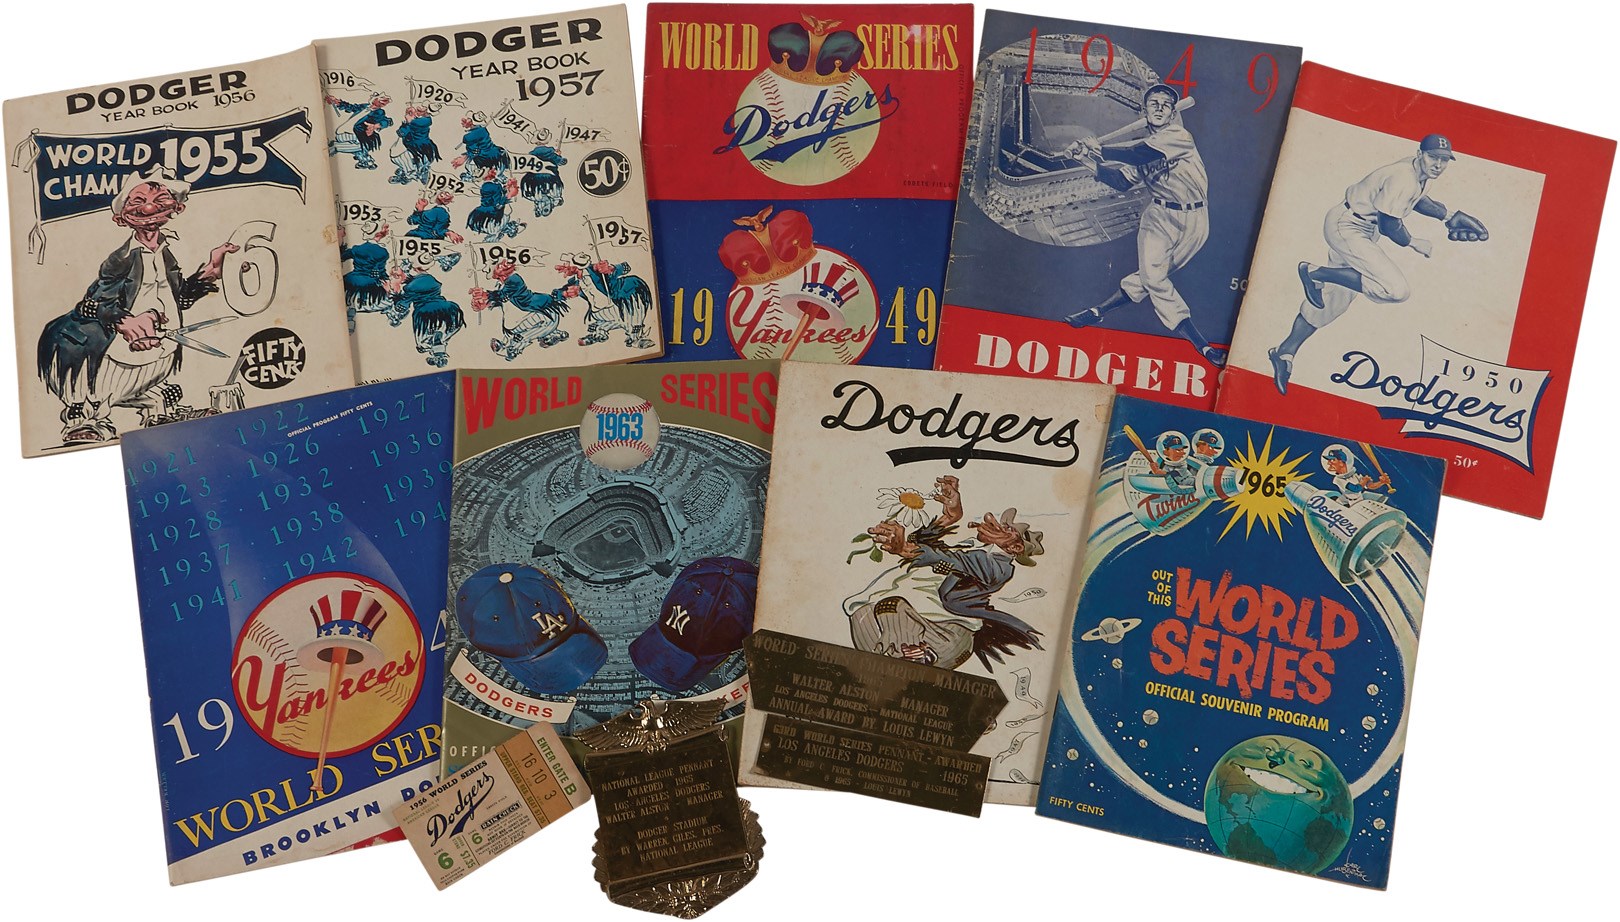 Jackie Robinson & Brooklyn Dodgers - 1940s-60s Brooklyn Dodgers World Series Ticket, Plaque, Yearbook & Program Collection (13)